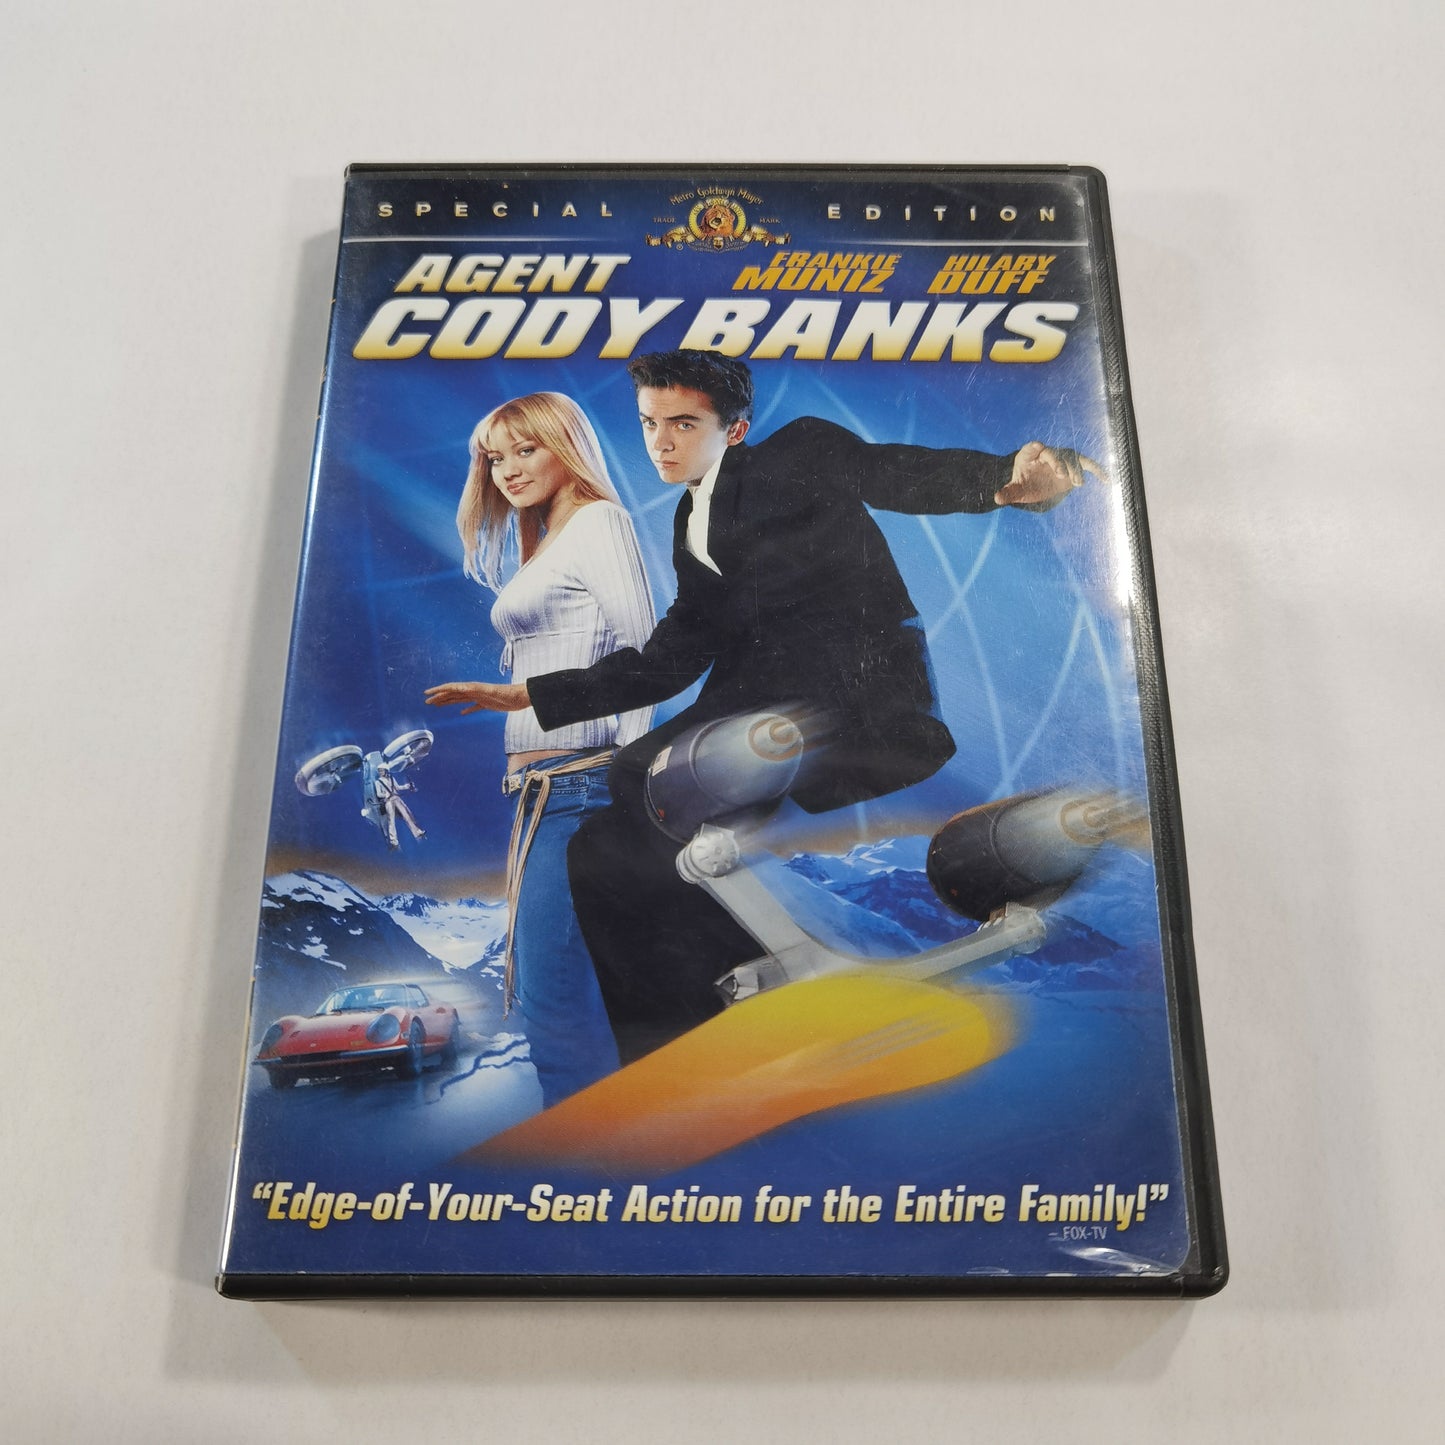 Agent Cody Banks (2003) - DVD US 2003 Special Edition